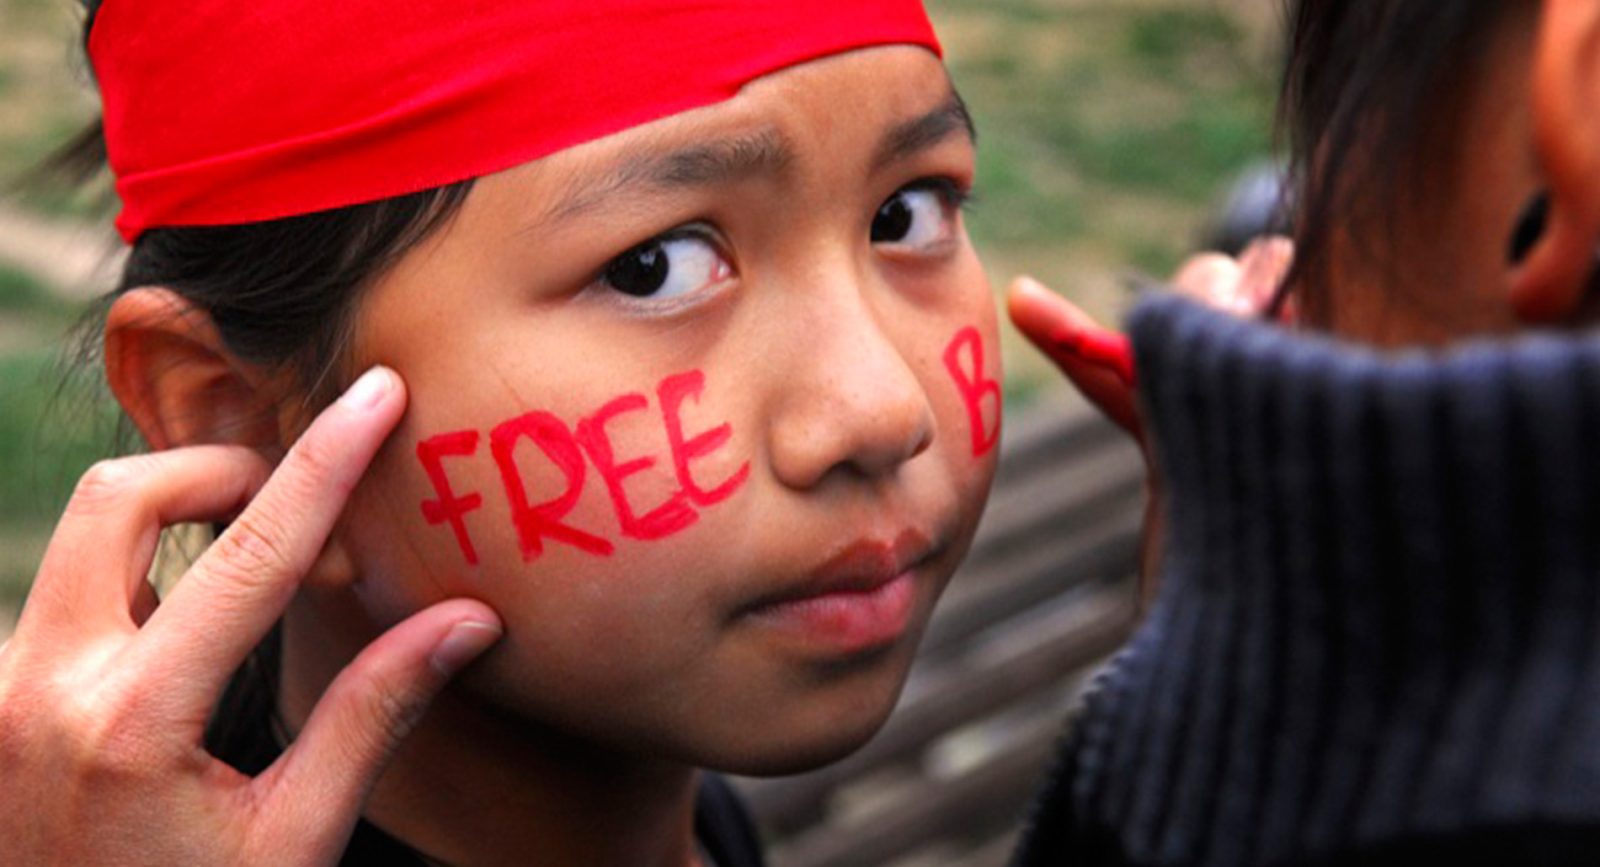 A young girl with 'Free Burma' written across her cheeks